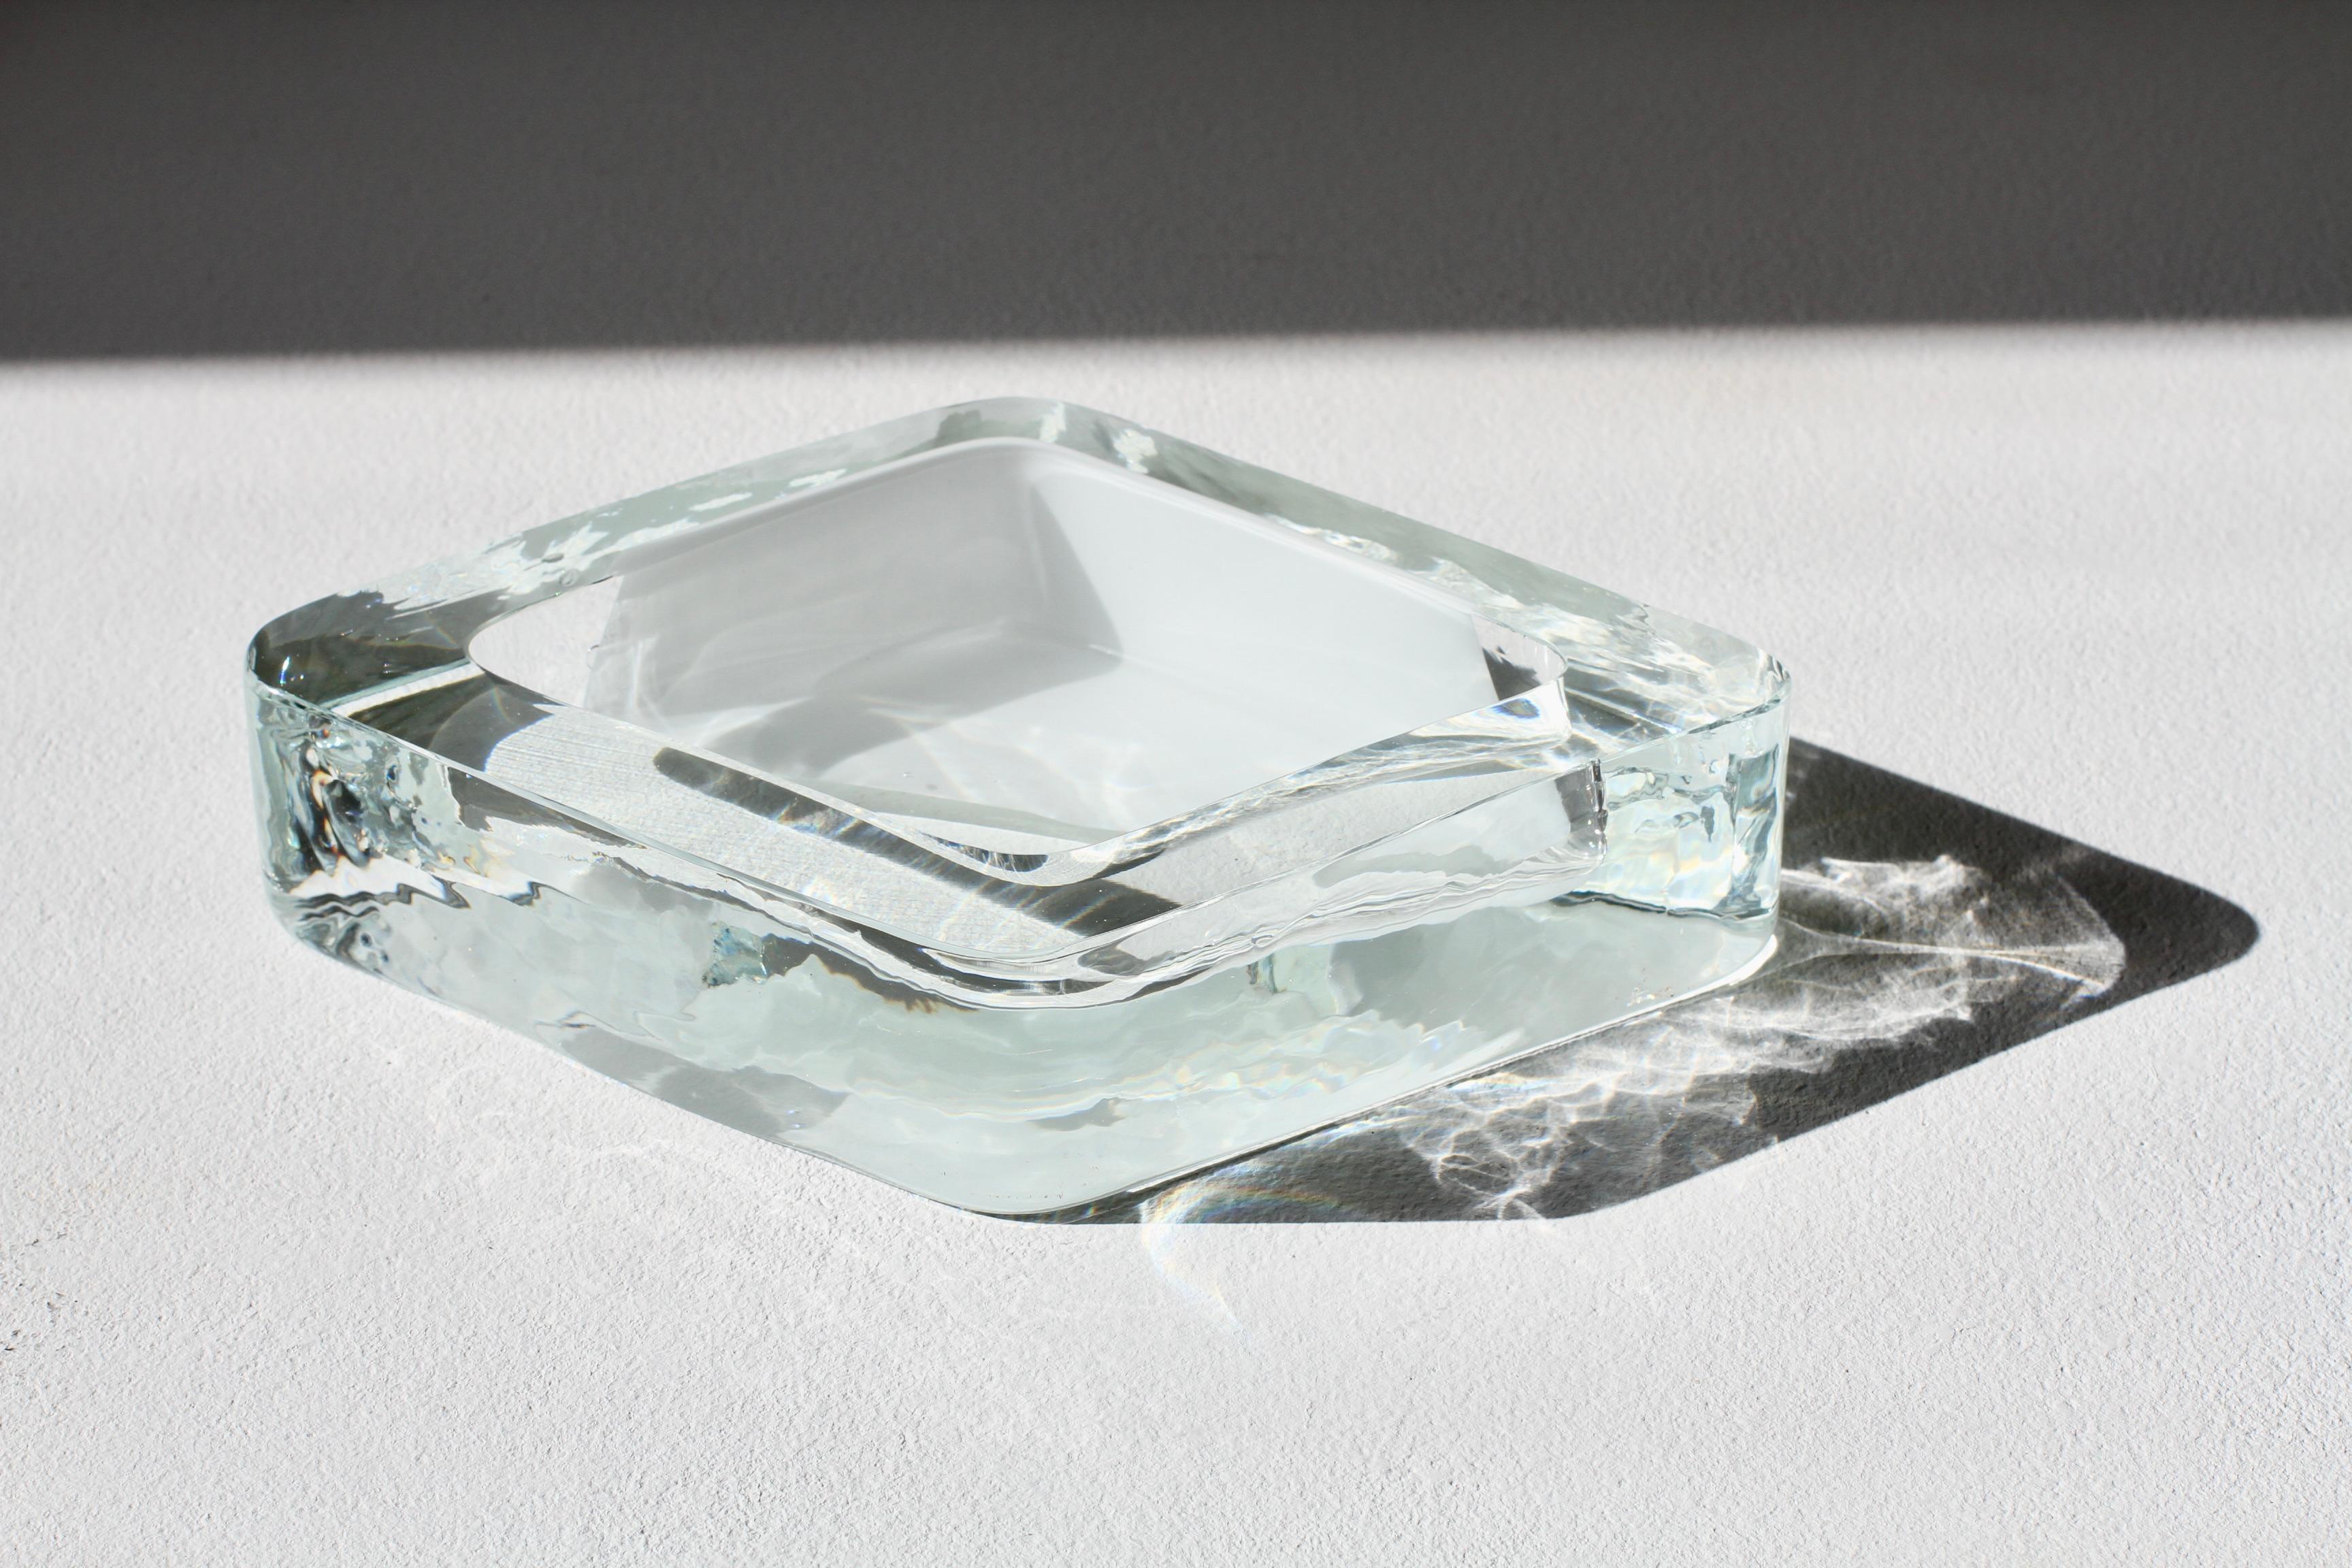 Antonio da Ros for Cenedese signed, large and heavy vintage mid-century modern Italian Murano glass rhombus (diamond) shaped bowl, serving dish or ashtray, circa 1965-1975. Large and heavy piece of glass features an geometric design with clear glass